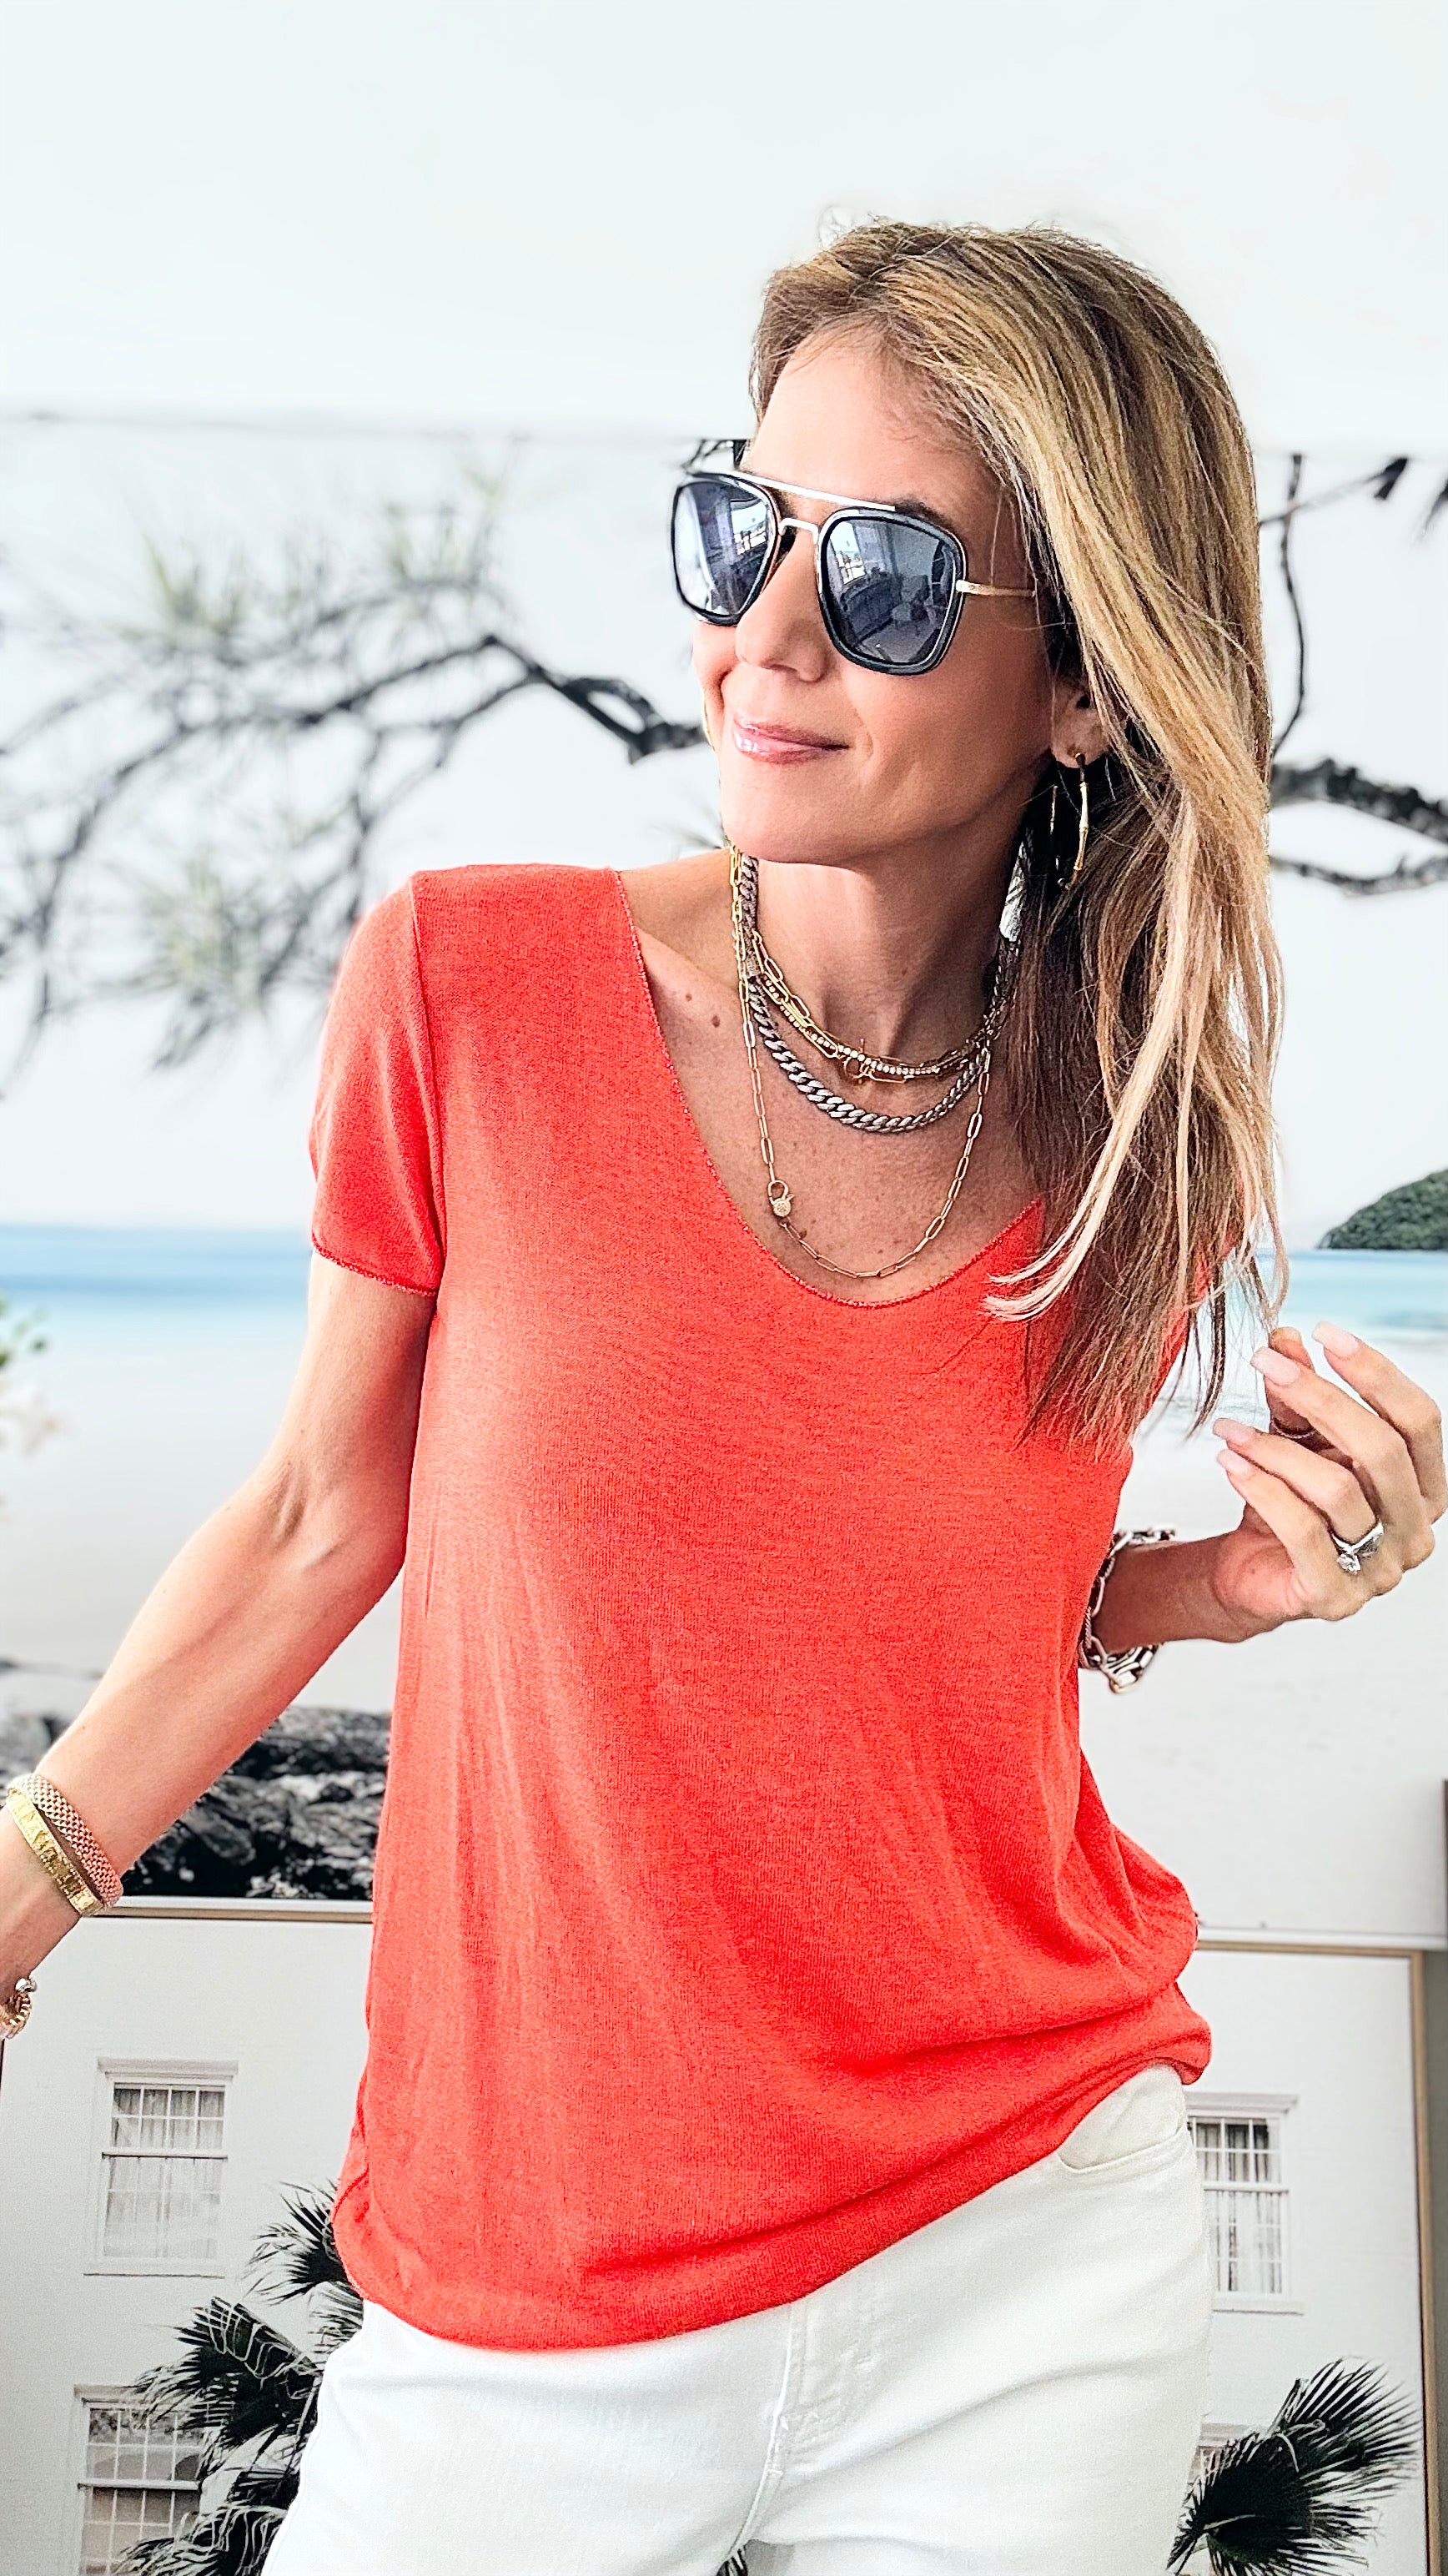 Recoleta Short Sleeve Italian Top - Tangerine-110 Short Sleeve Tops-Germany-Coastal Bloom Boutique, find the trendiest versions of the popular styles and looks Located in Indialantic, FL